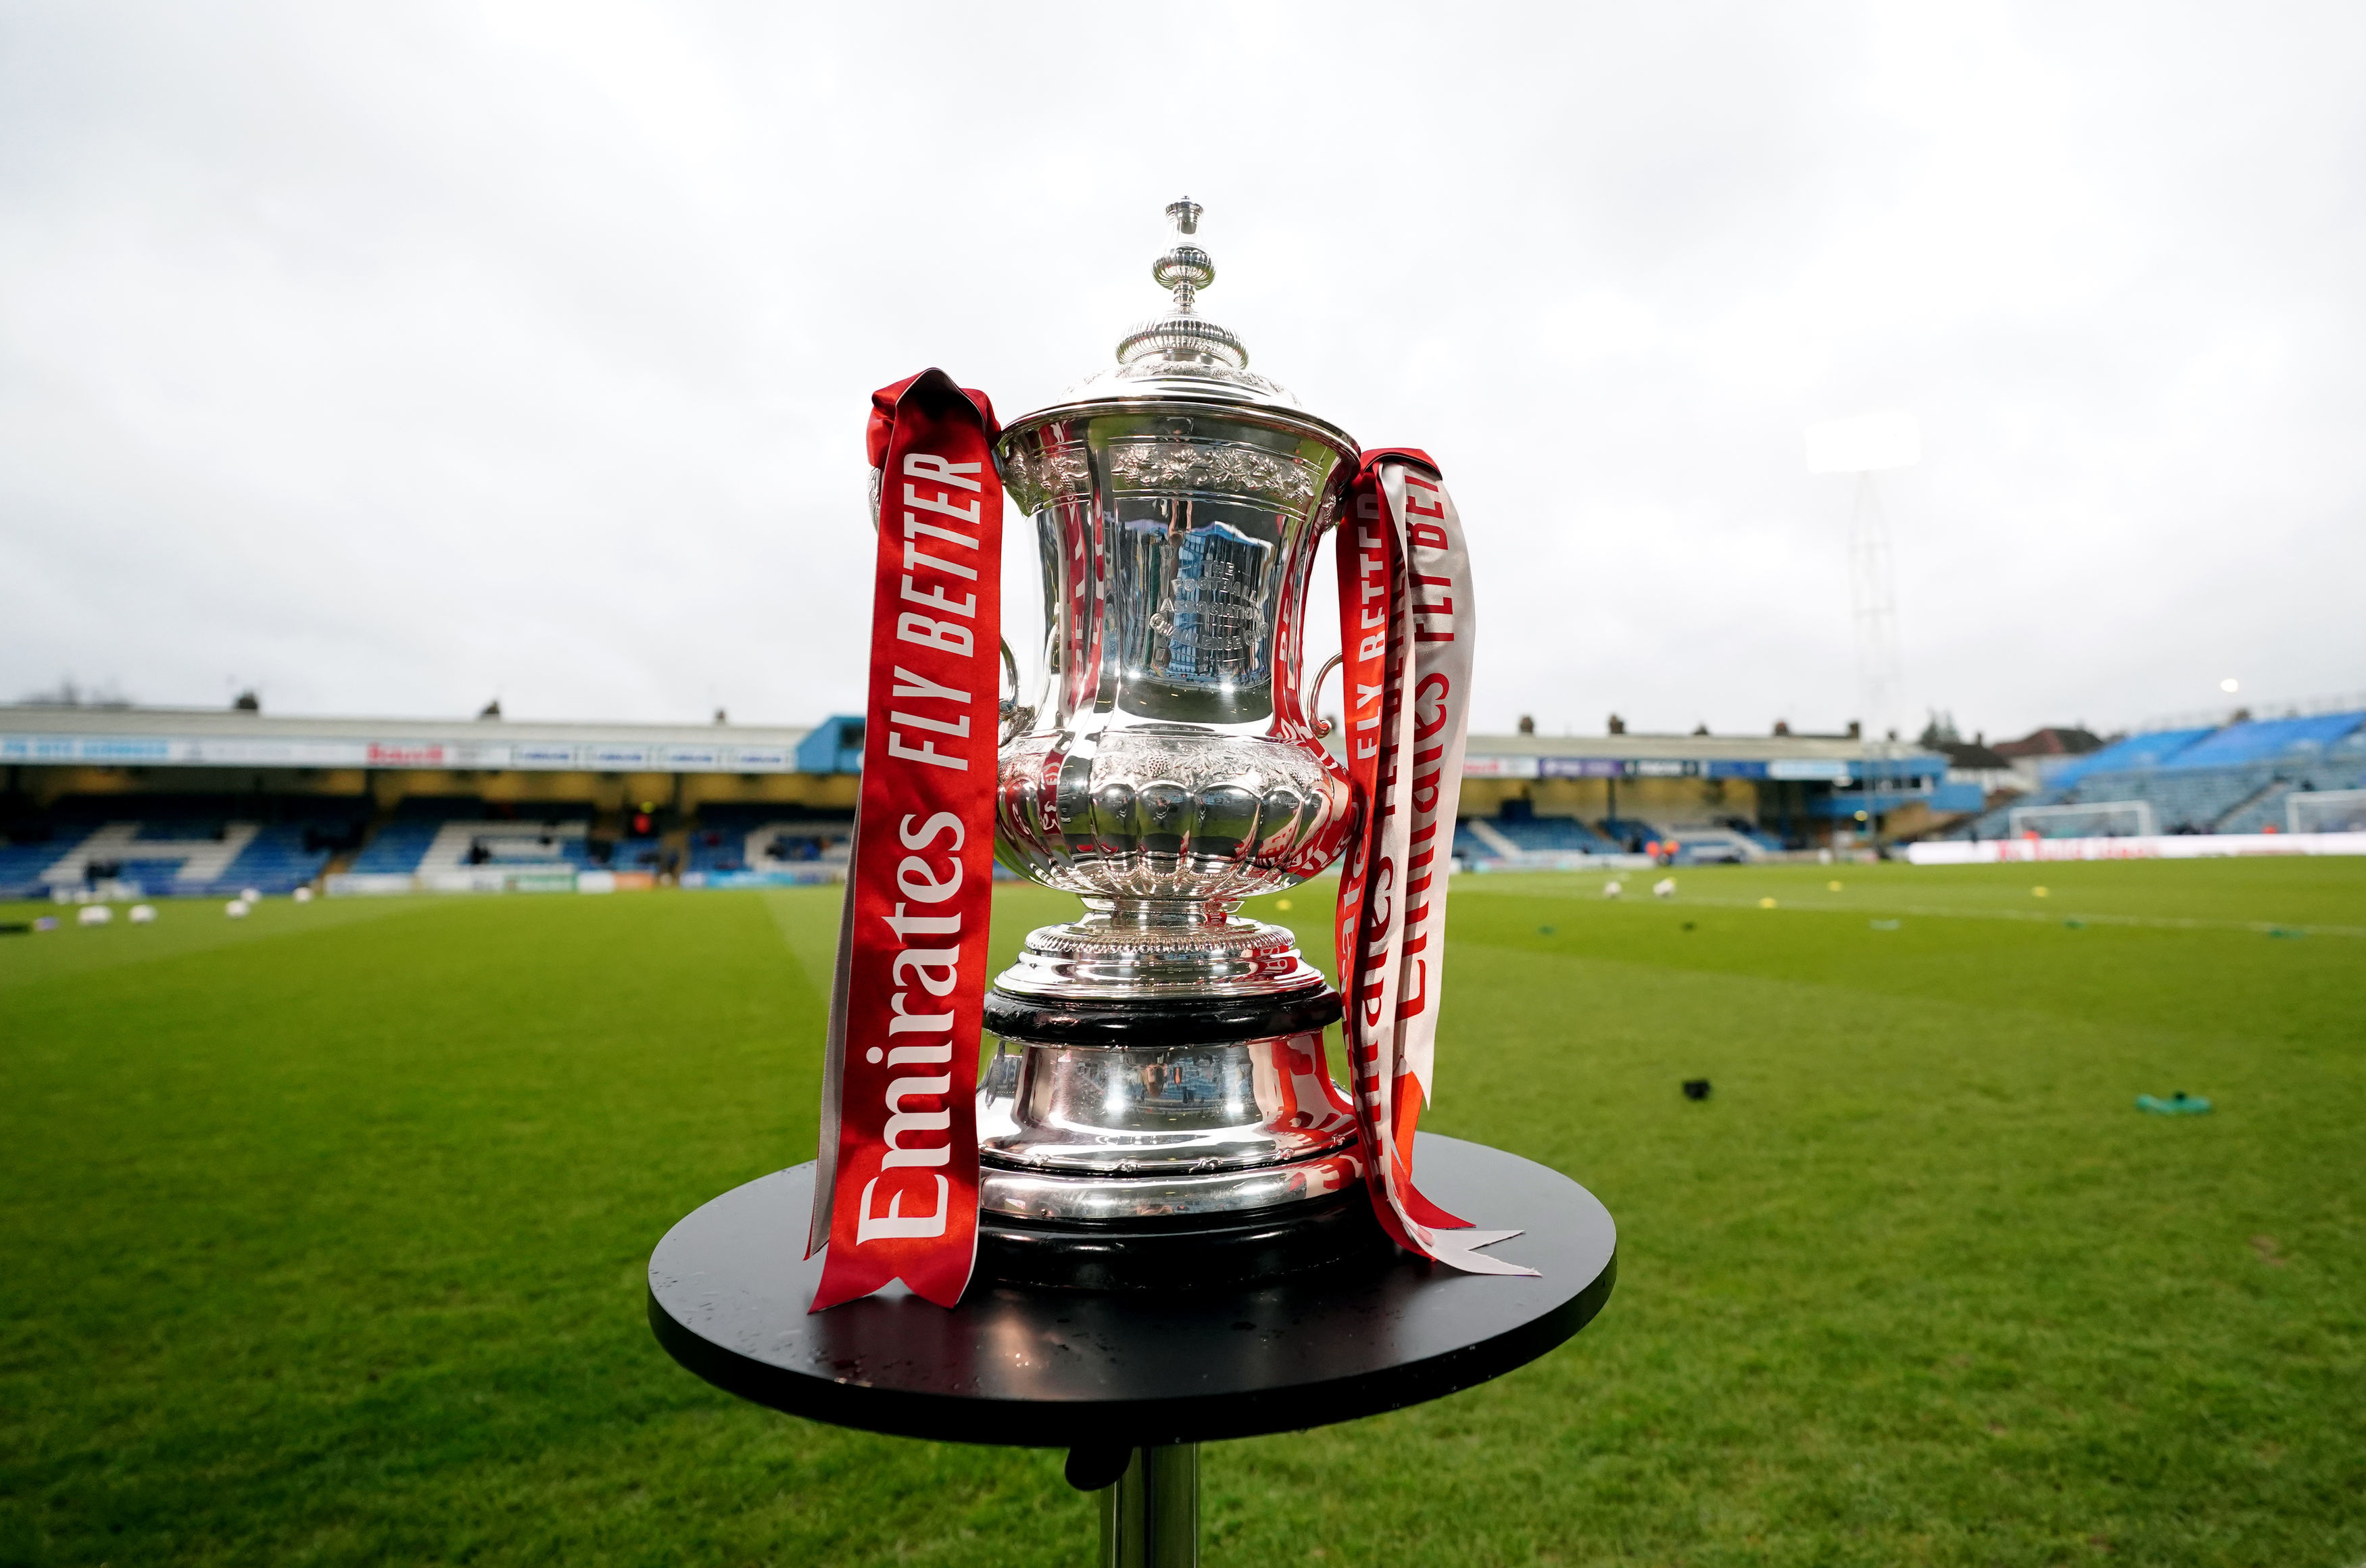 Major broadcaster loses rights to show FA Cup games after huge blow to fans